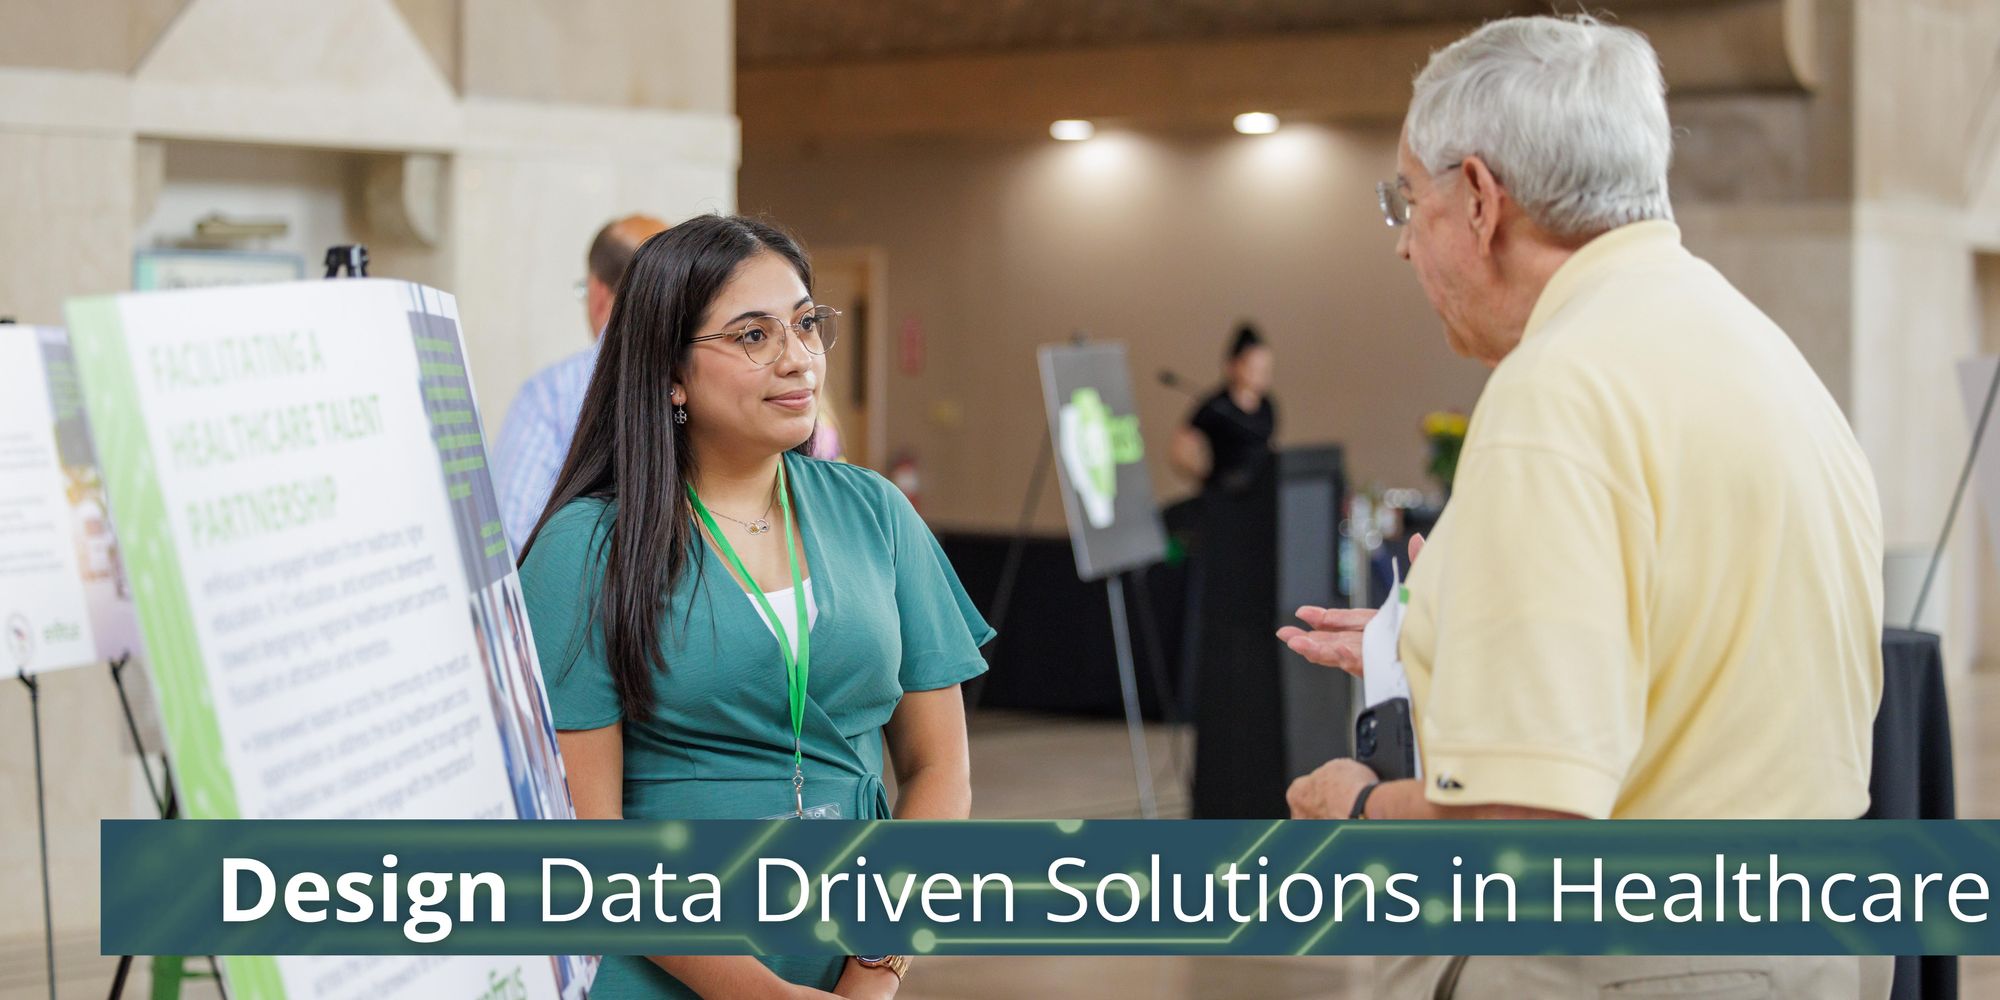 Design Data Driven Solutions to Advance Healthcare Resources